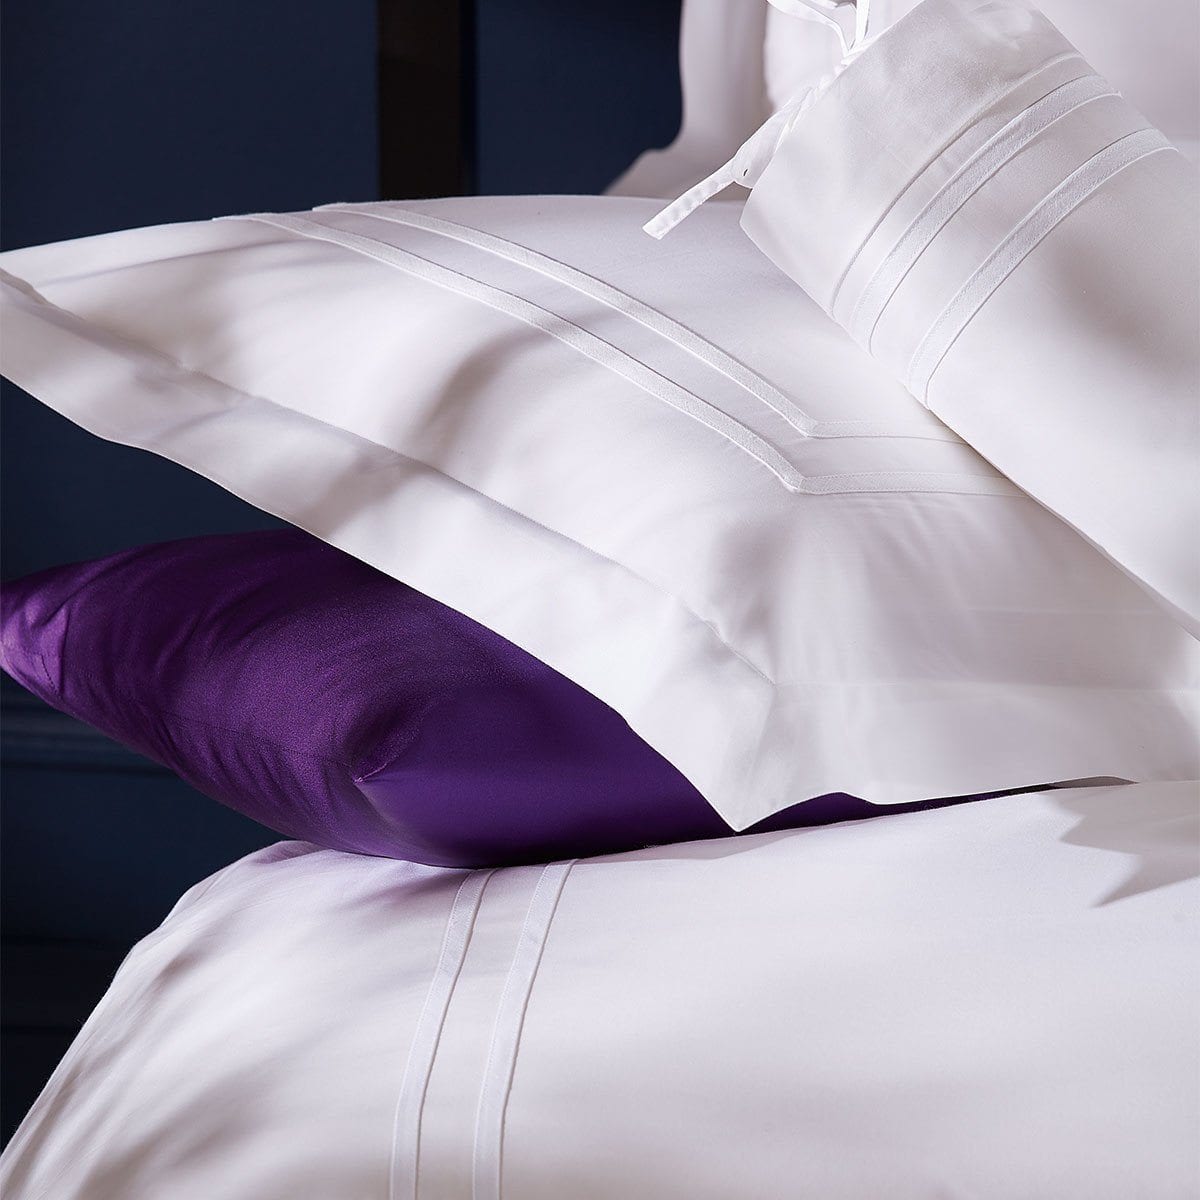 Fig Linens - Harmonie White Percale Bedding by Yves Delorme